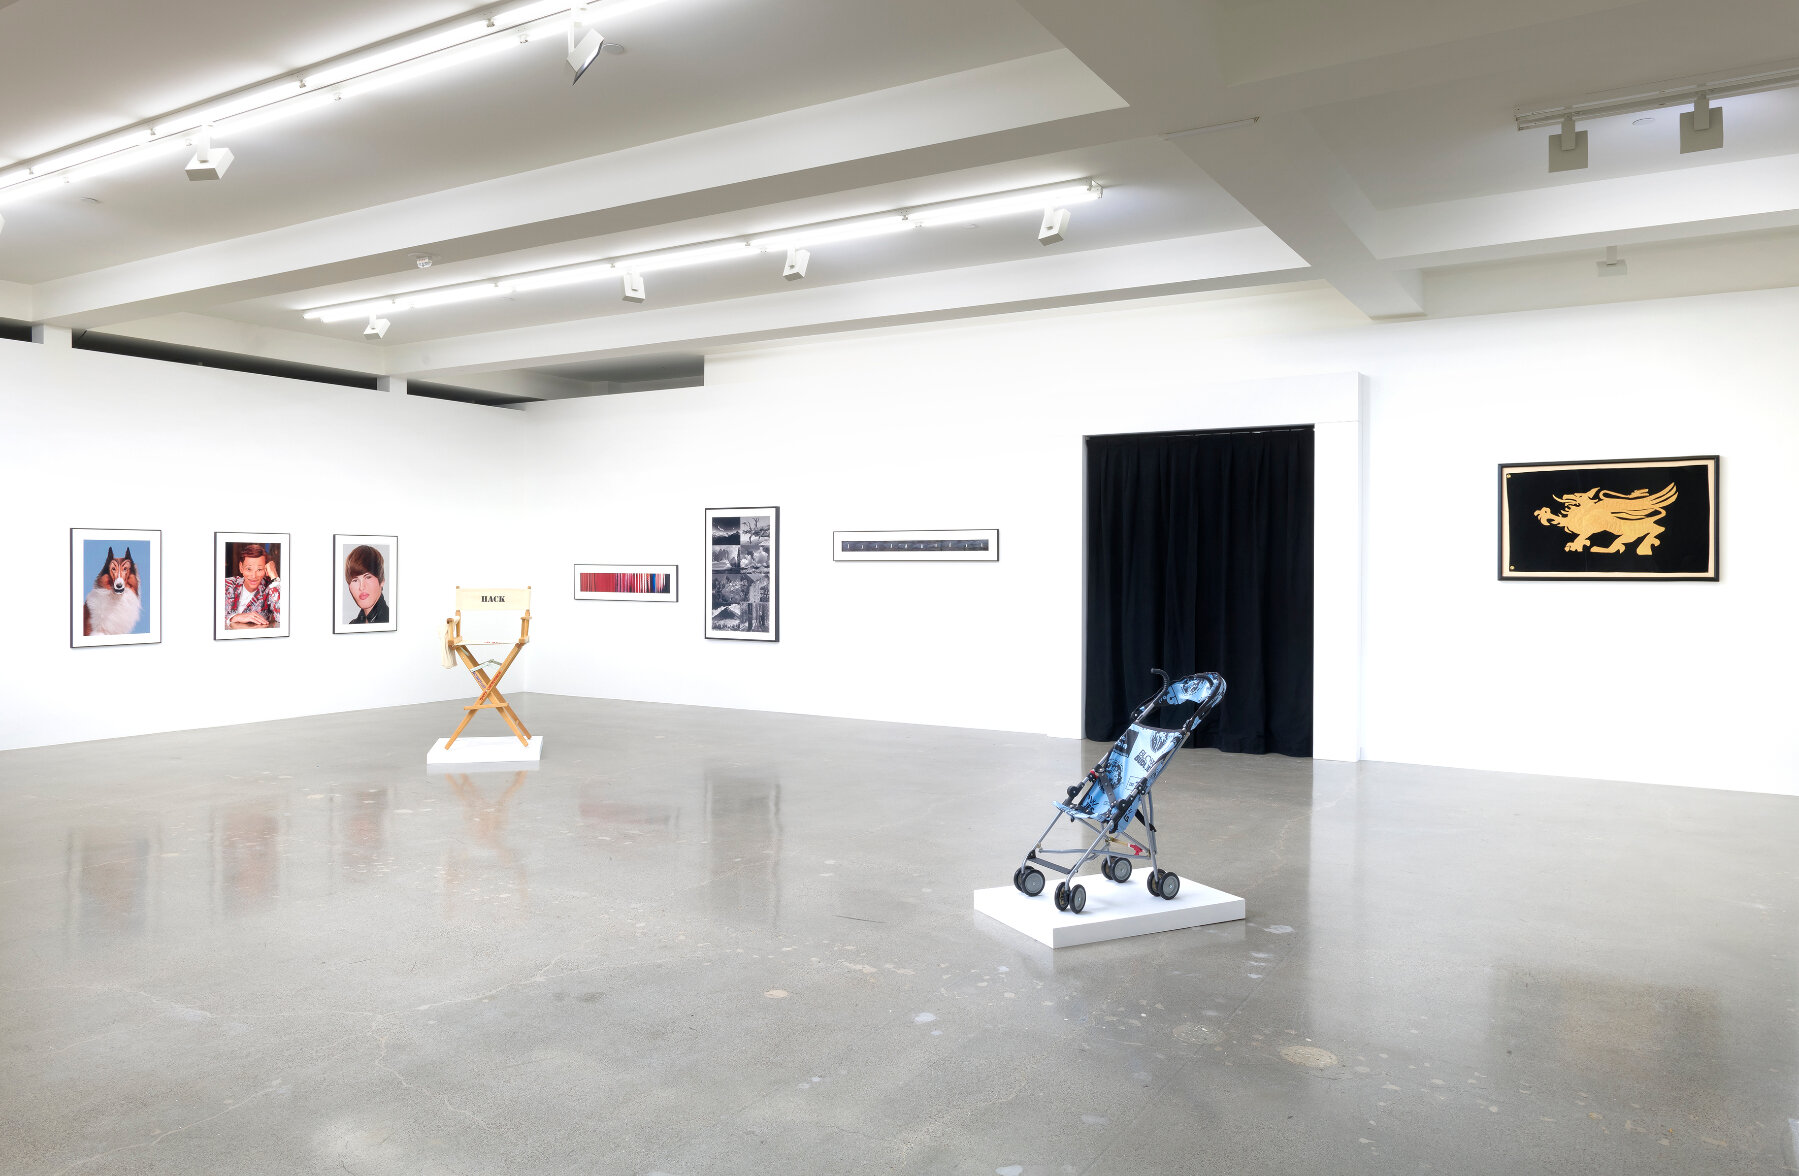  Installation view, John Waters,  Hollywood's Greatest Hits  February 16–May 1, 2021, Sprüth Magers, Los Angeles © John Waters Courtesy the artist and Sprüth Magers  Photo: Robert Wedemeyer  